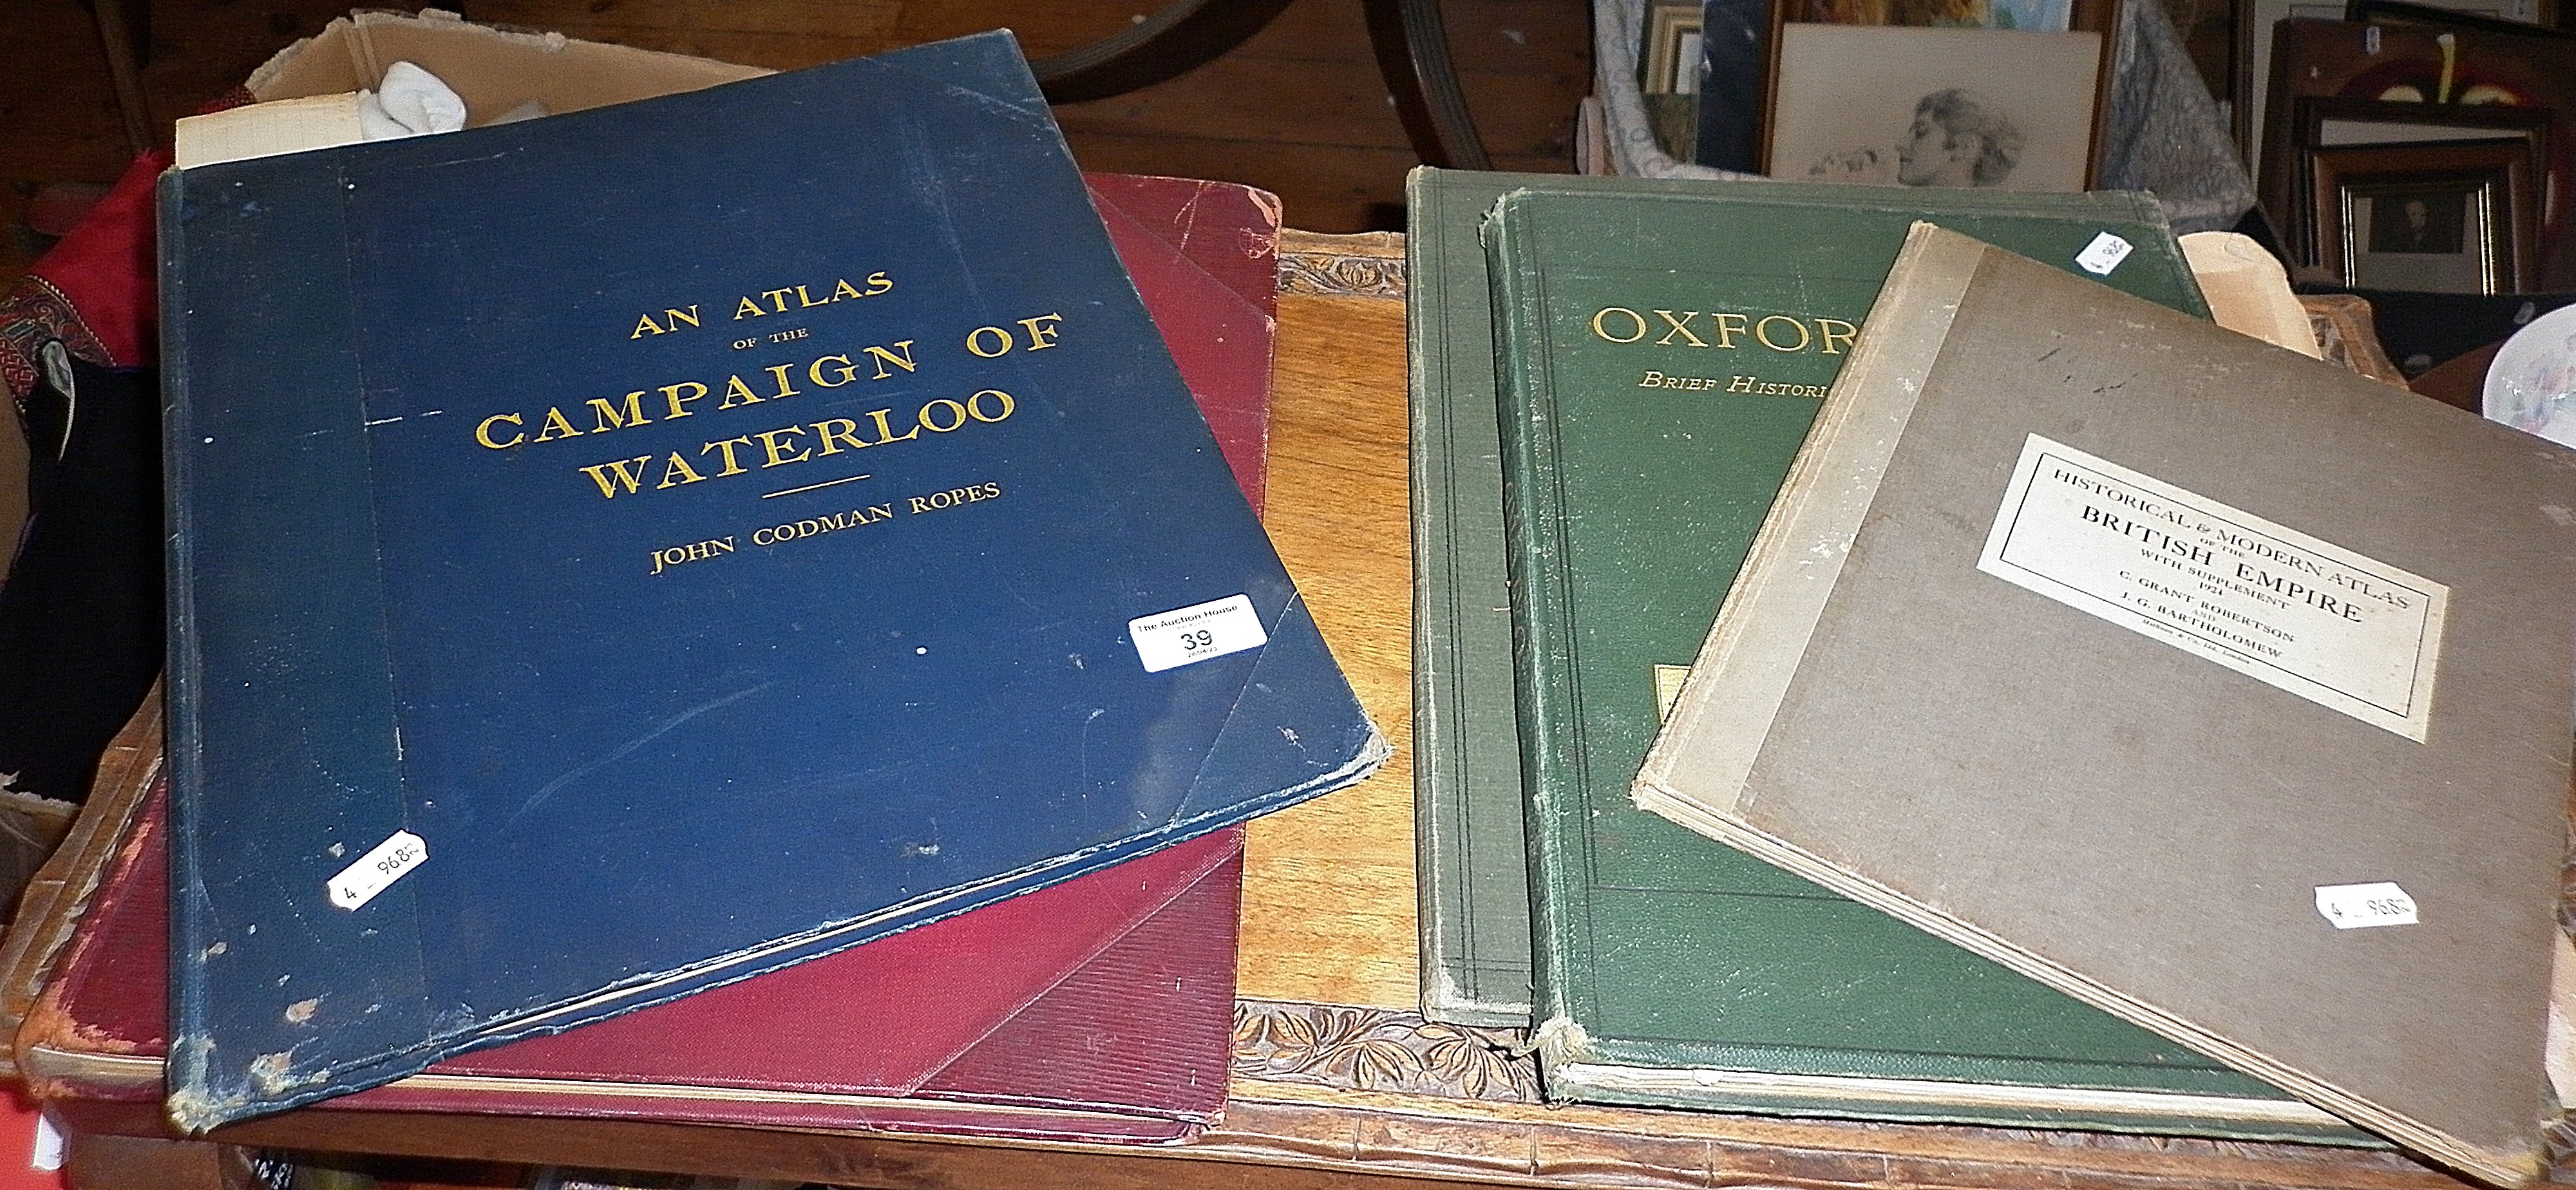 An Atlas of the Campaign of Waterloo by John Codman Ropes, 1894, other atlases and books